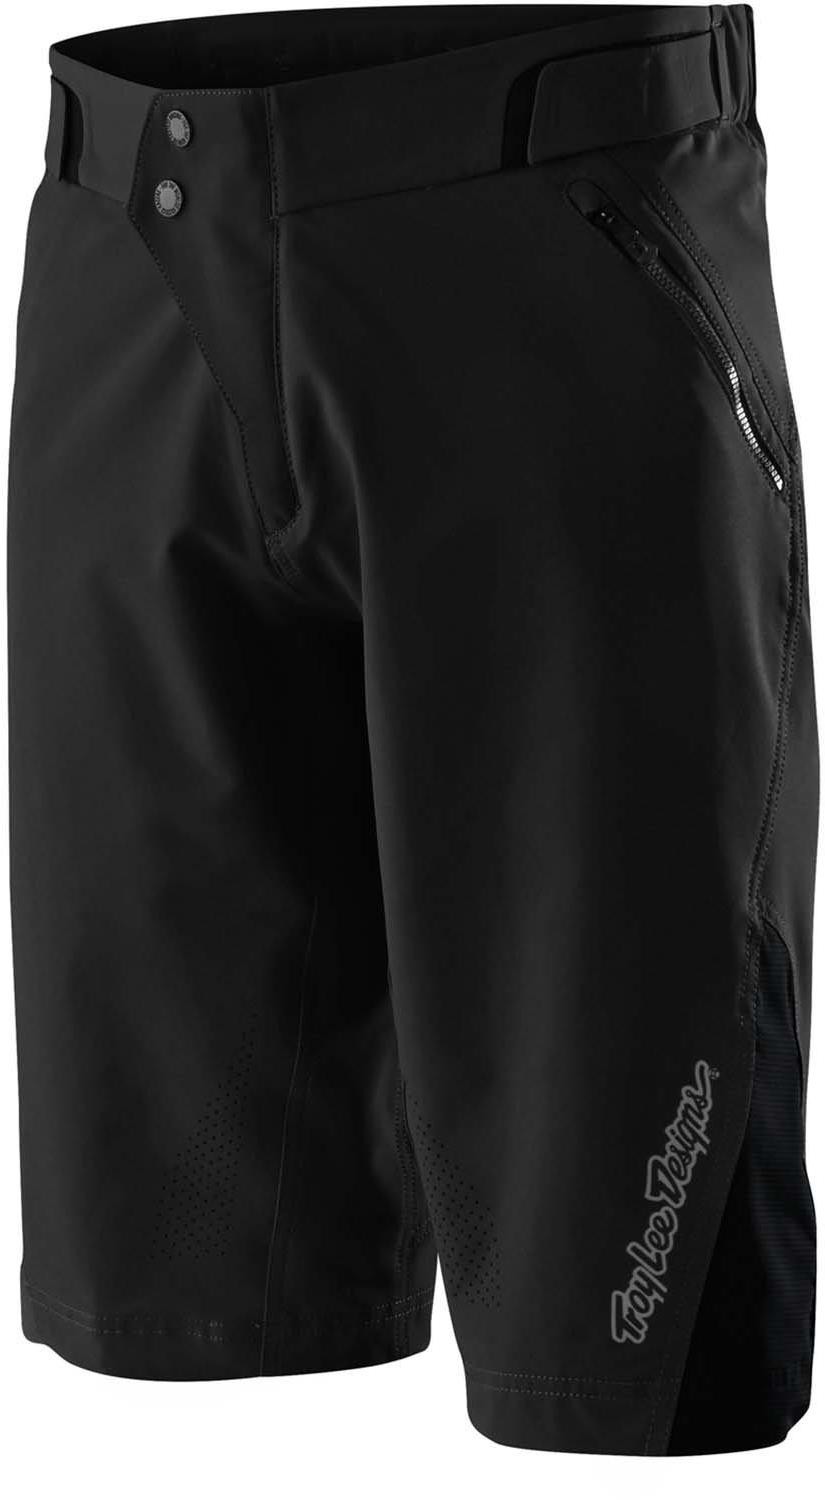 Ruckus Cycling Shorts Shell Only image 0